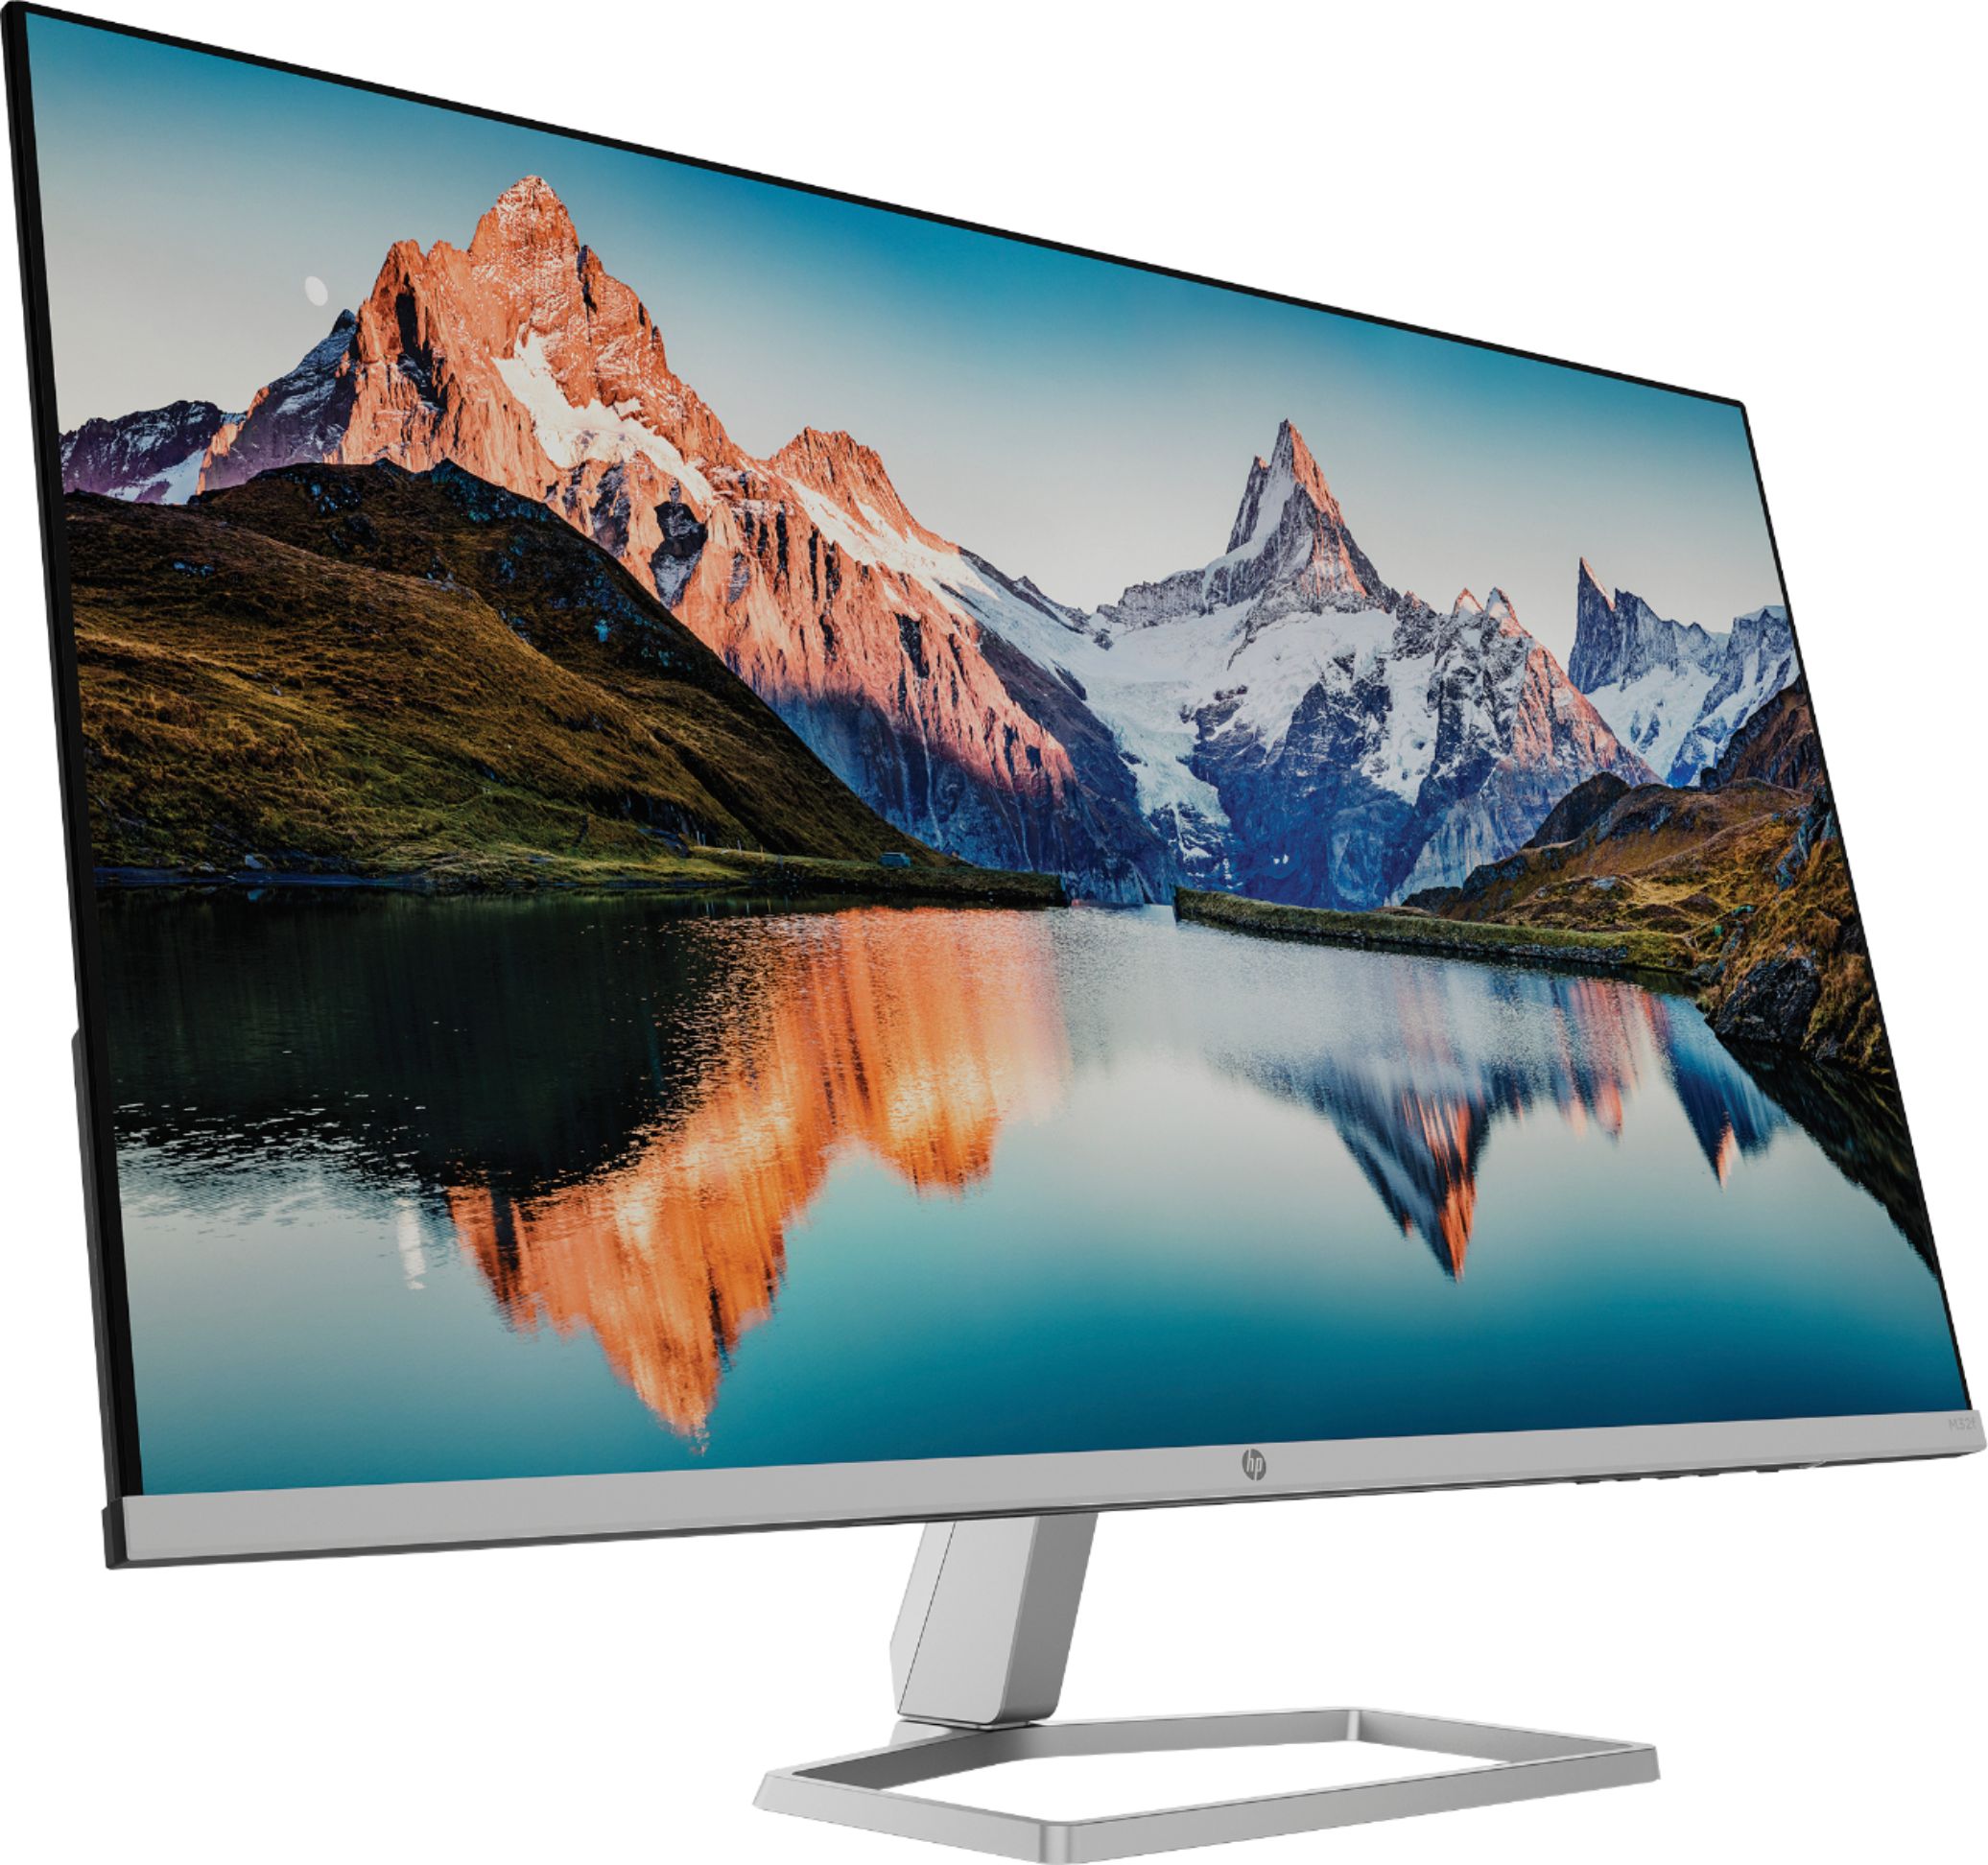 Left View: Samsung - A700 Series 32" LED 4K UHD Monitor with HDR - Black